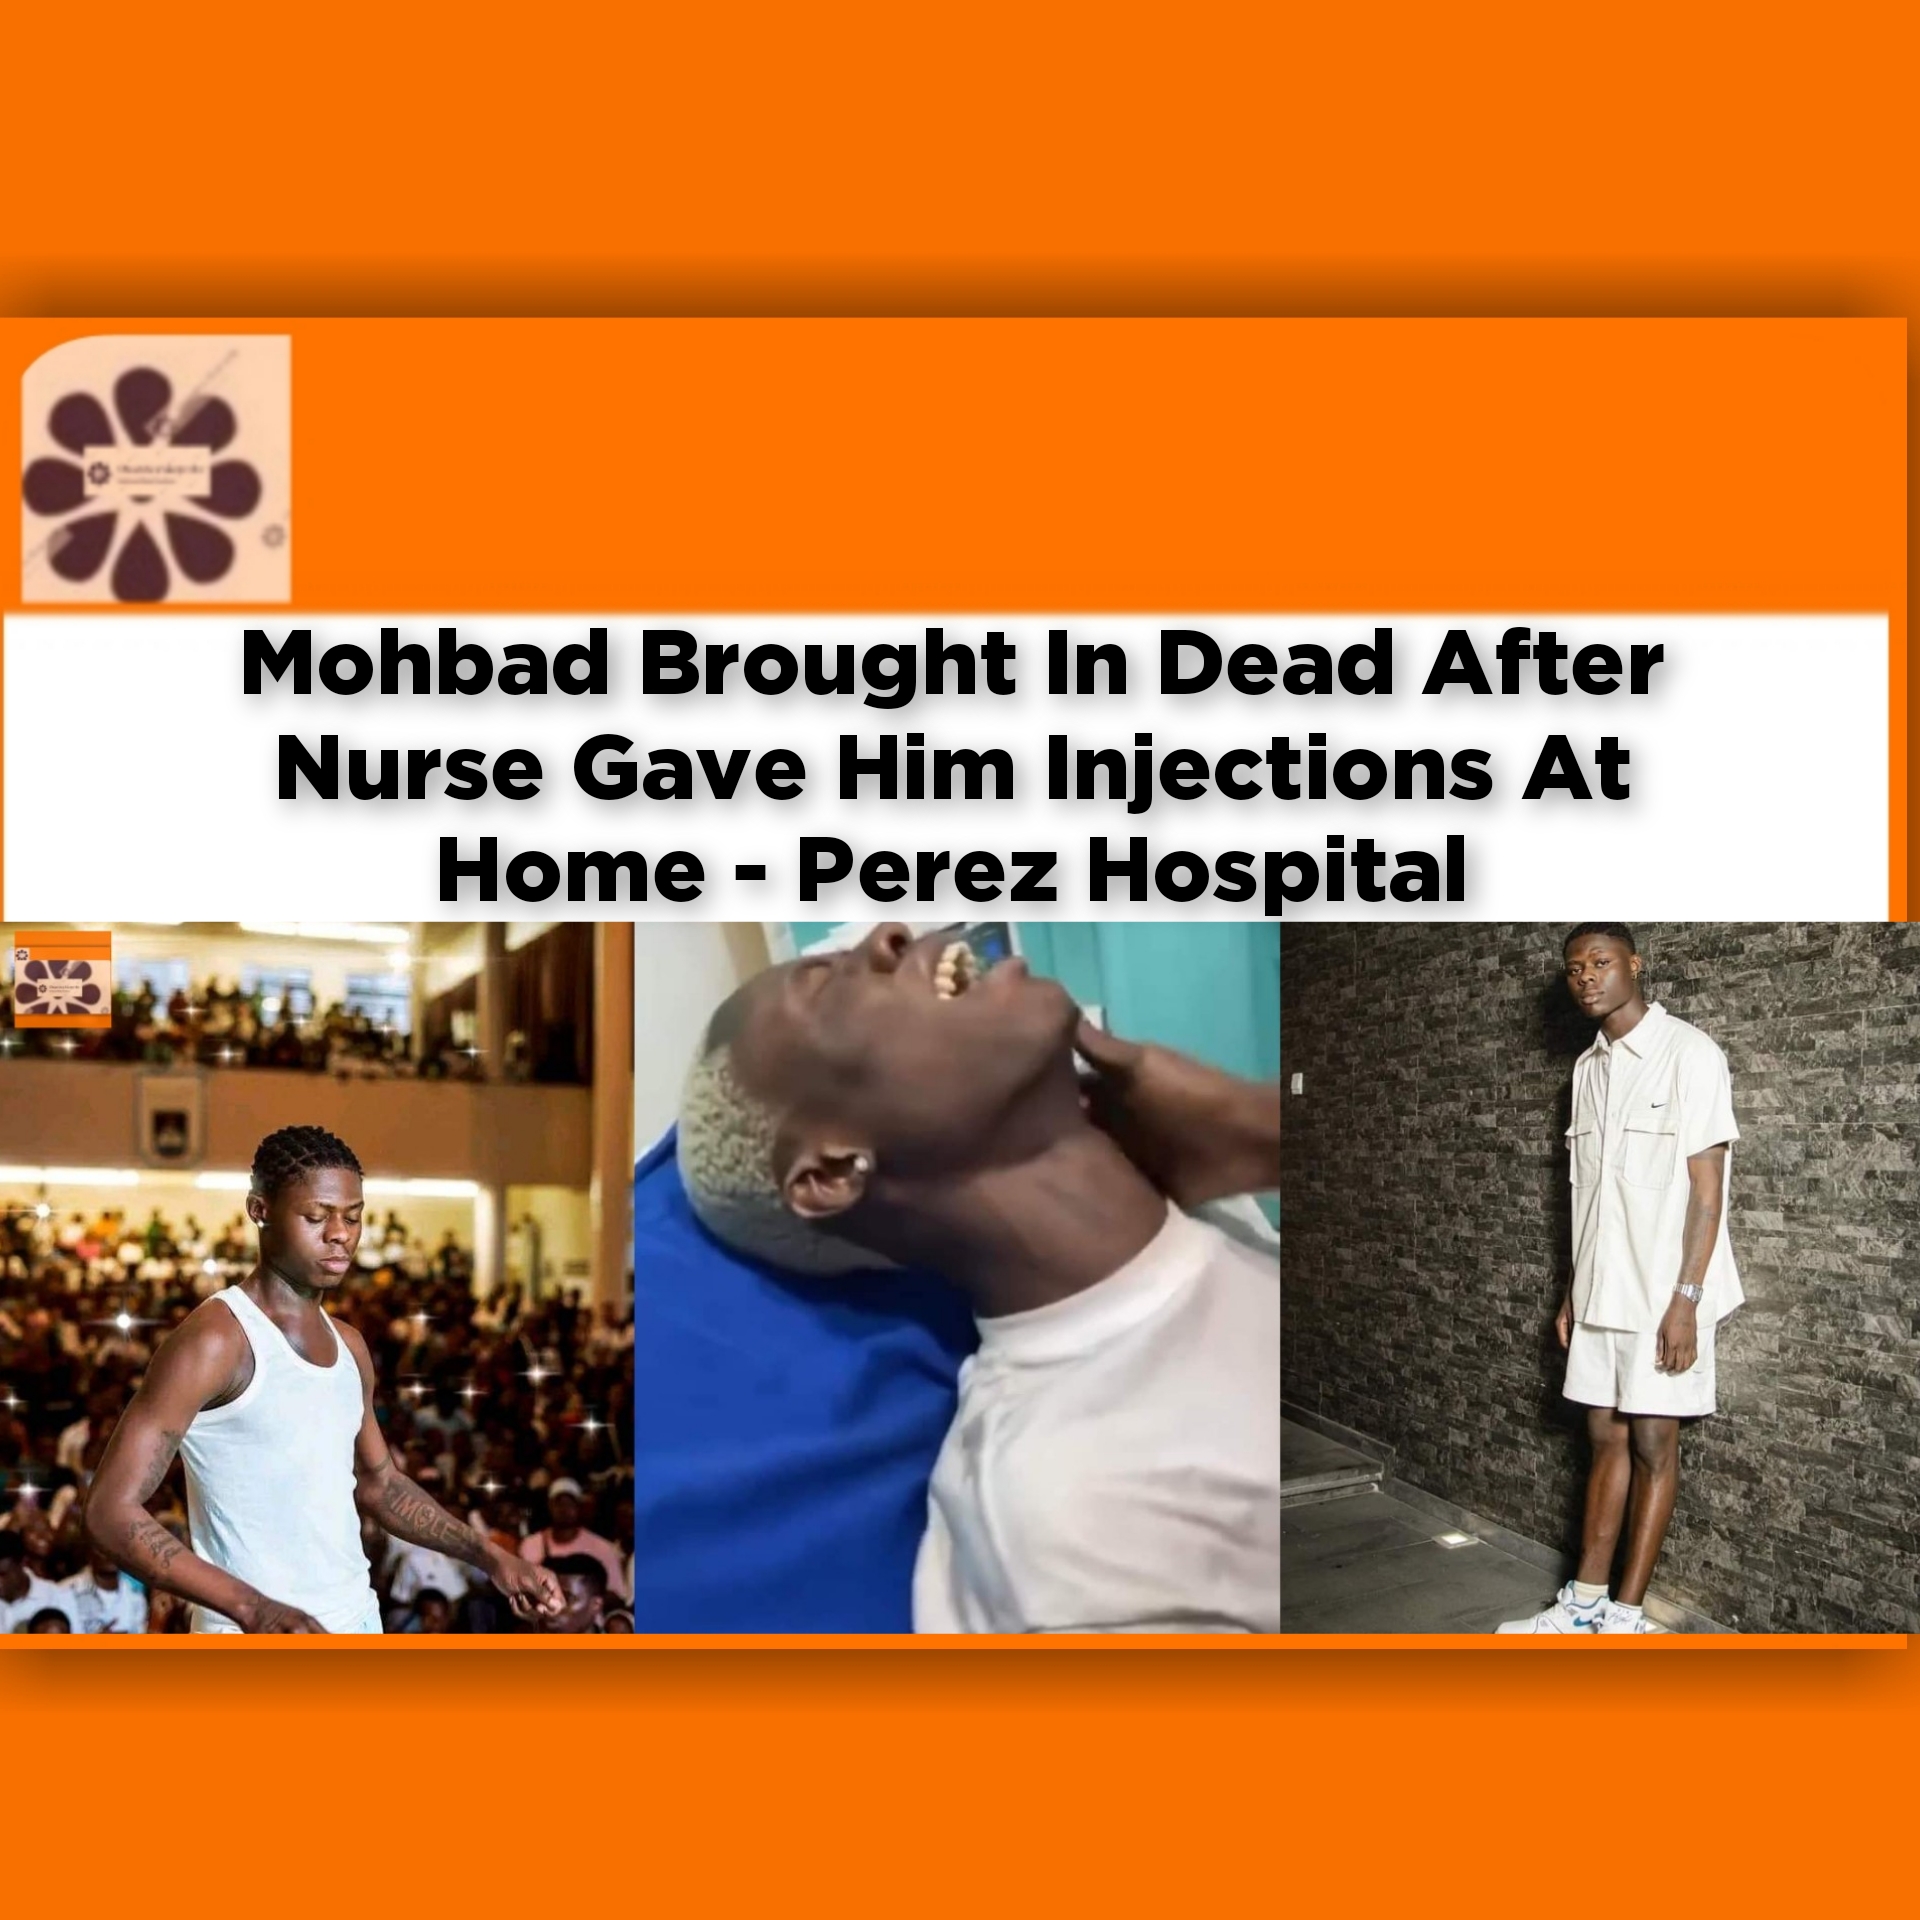 Mohbad Brought In Dead After Nurse Gave Him Injections At Home - Perez Hospital ~ OsazuwaAkonedo #Sowore